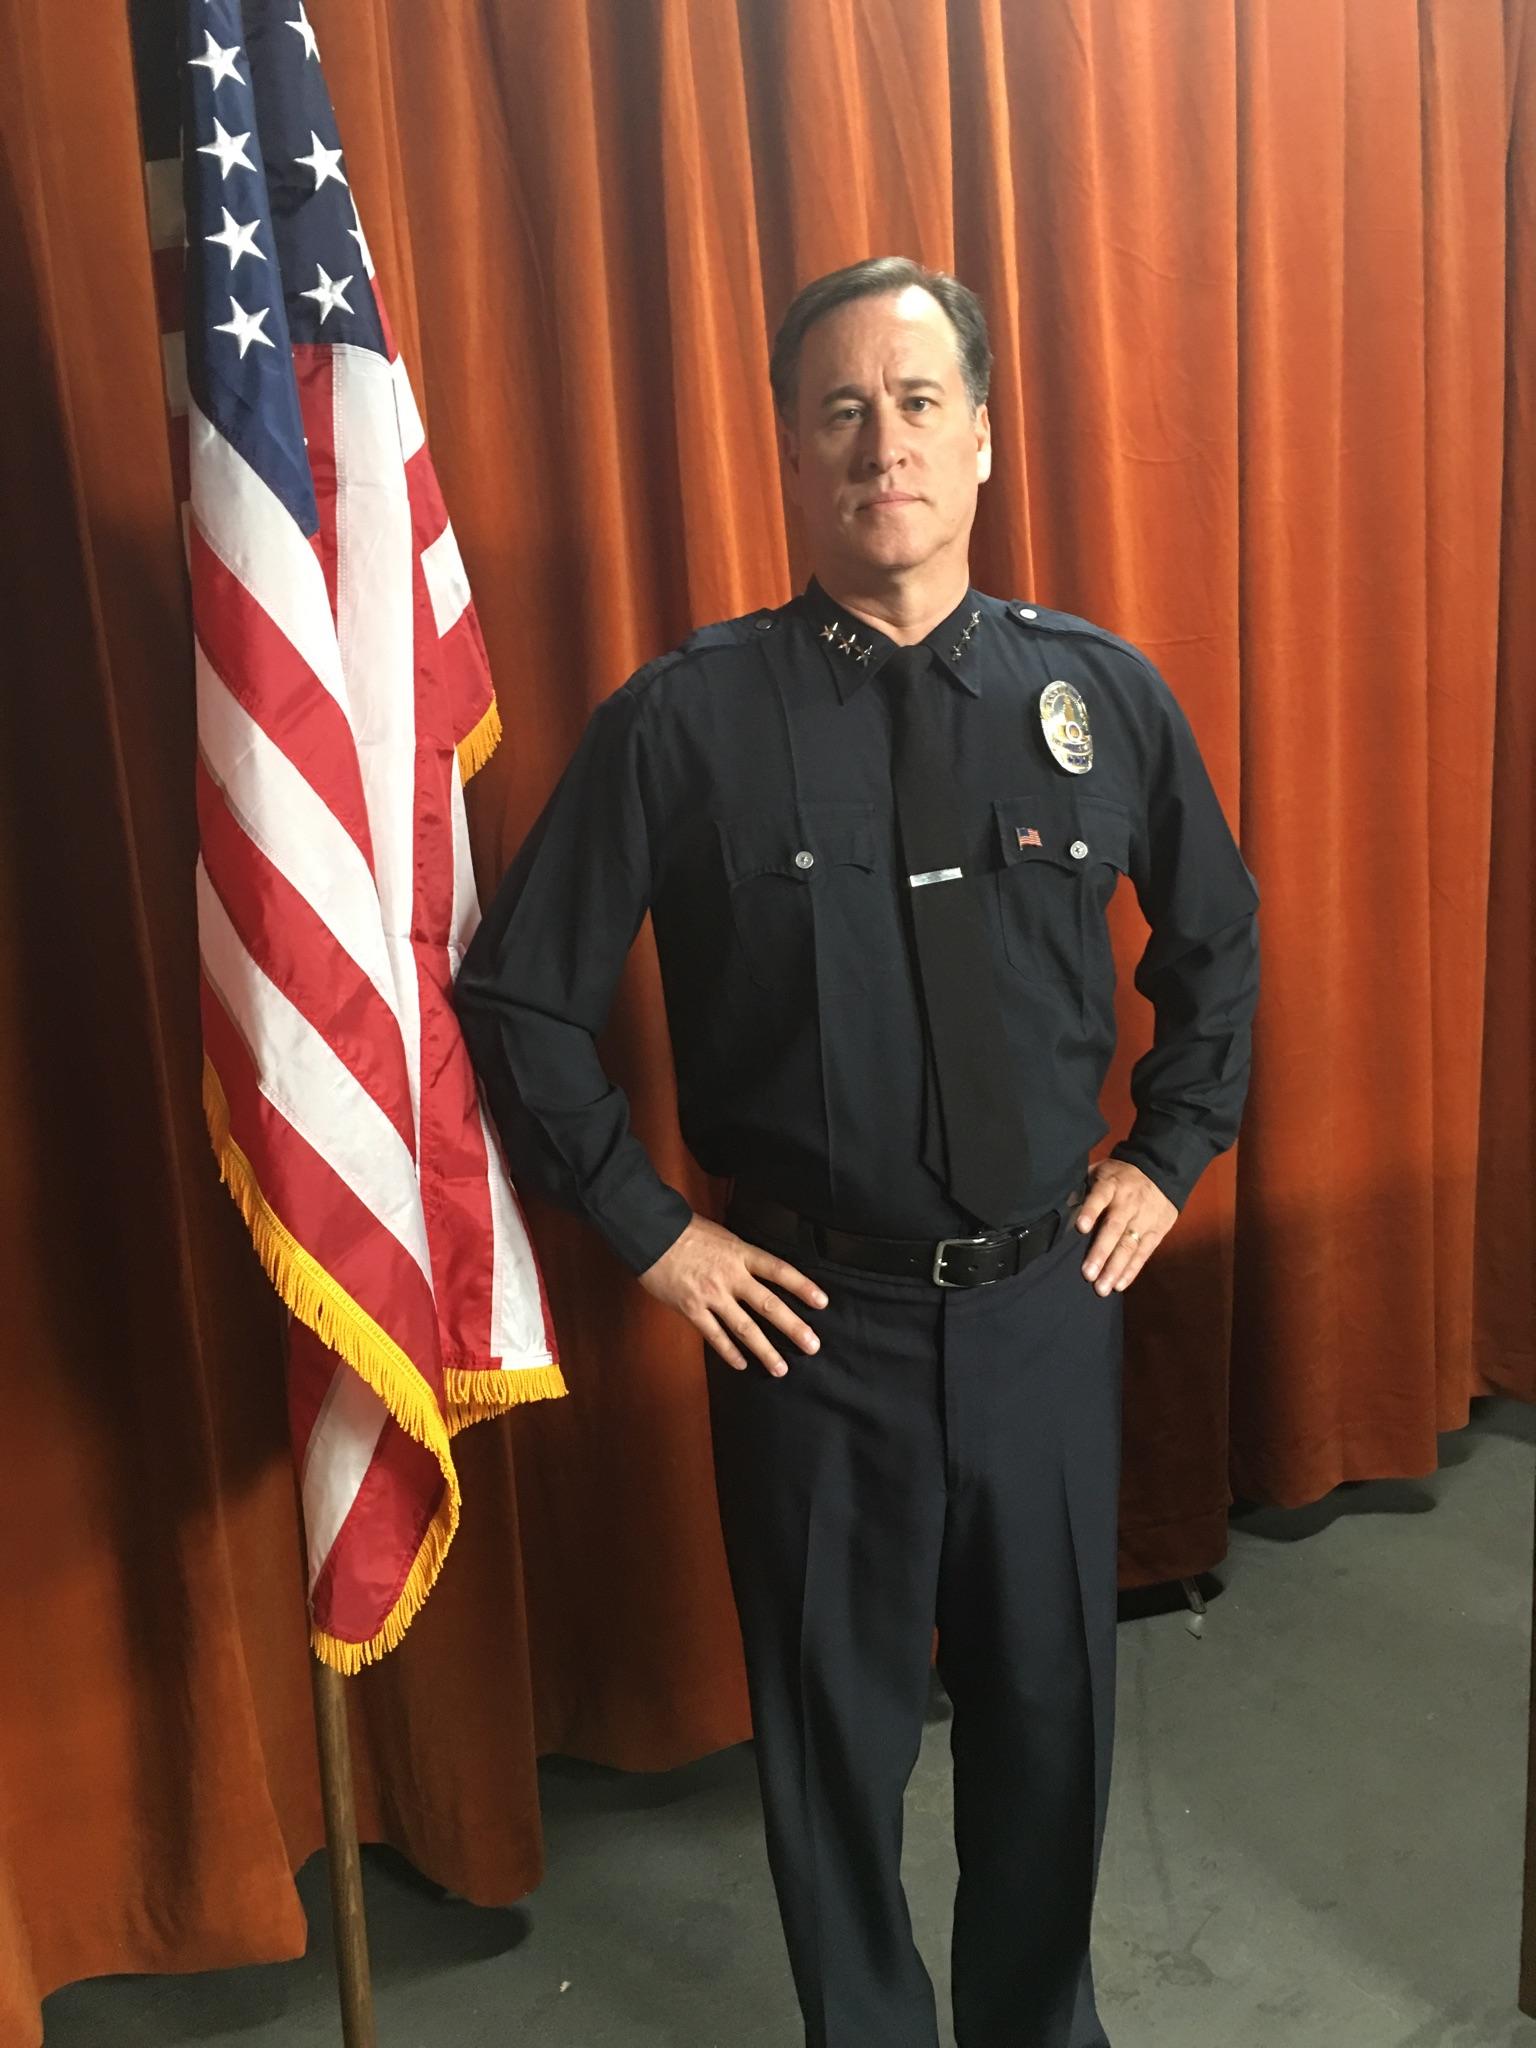 Mark Allyn as the Police Chief in 